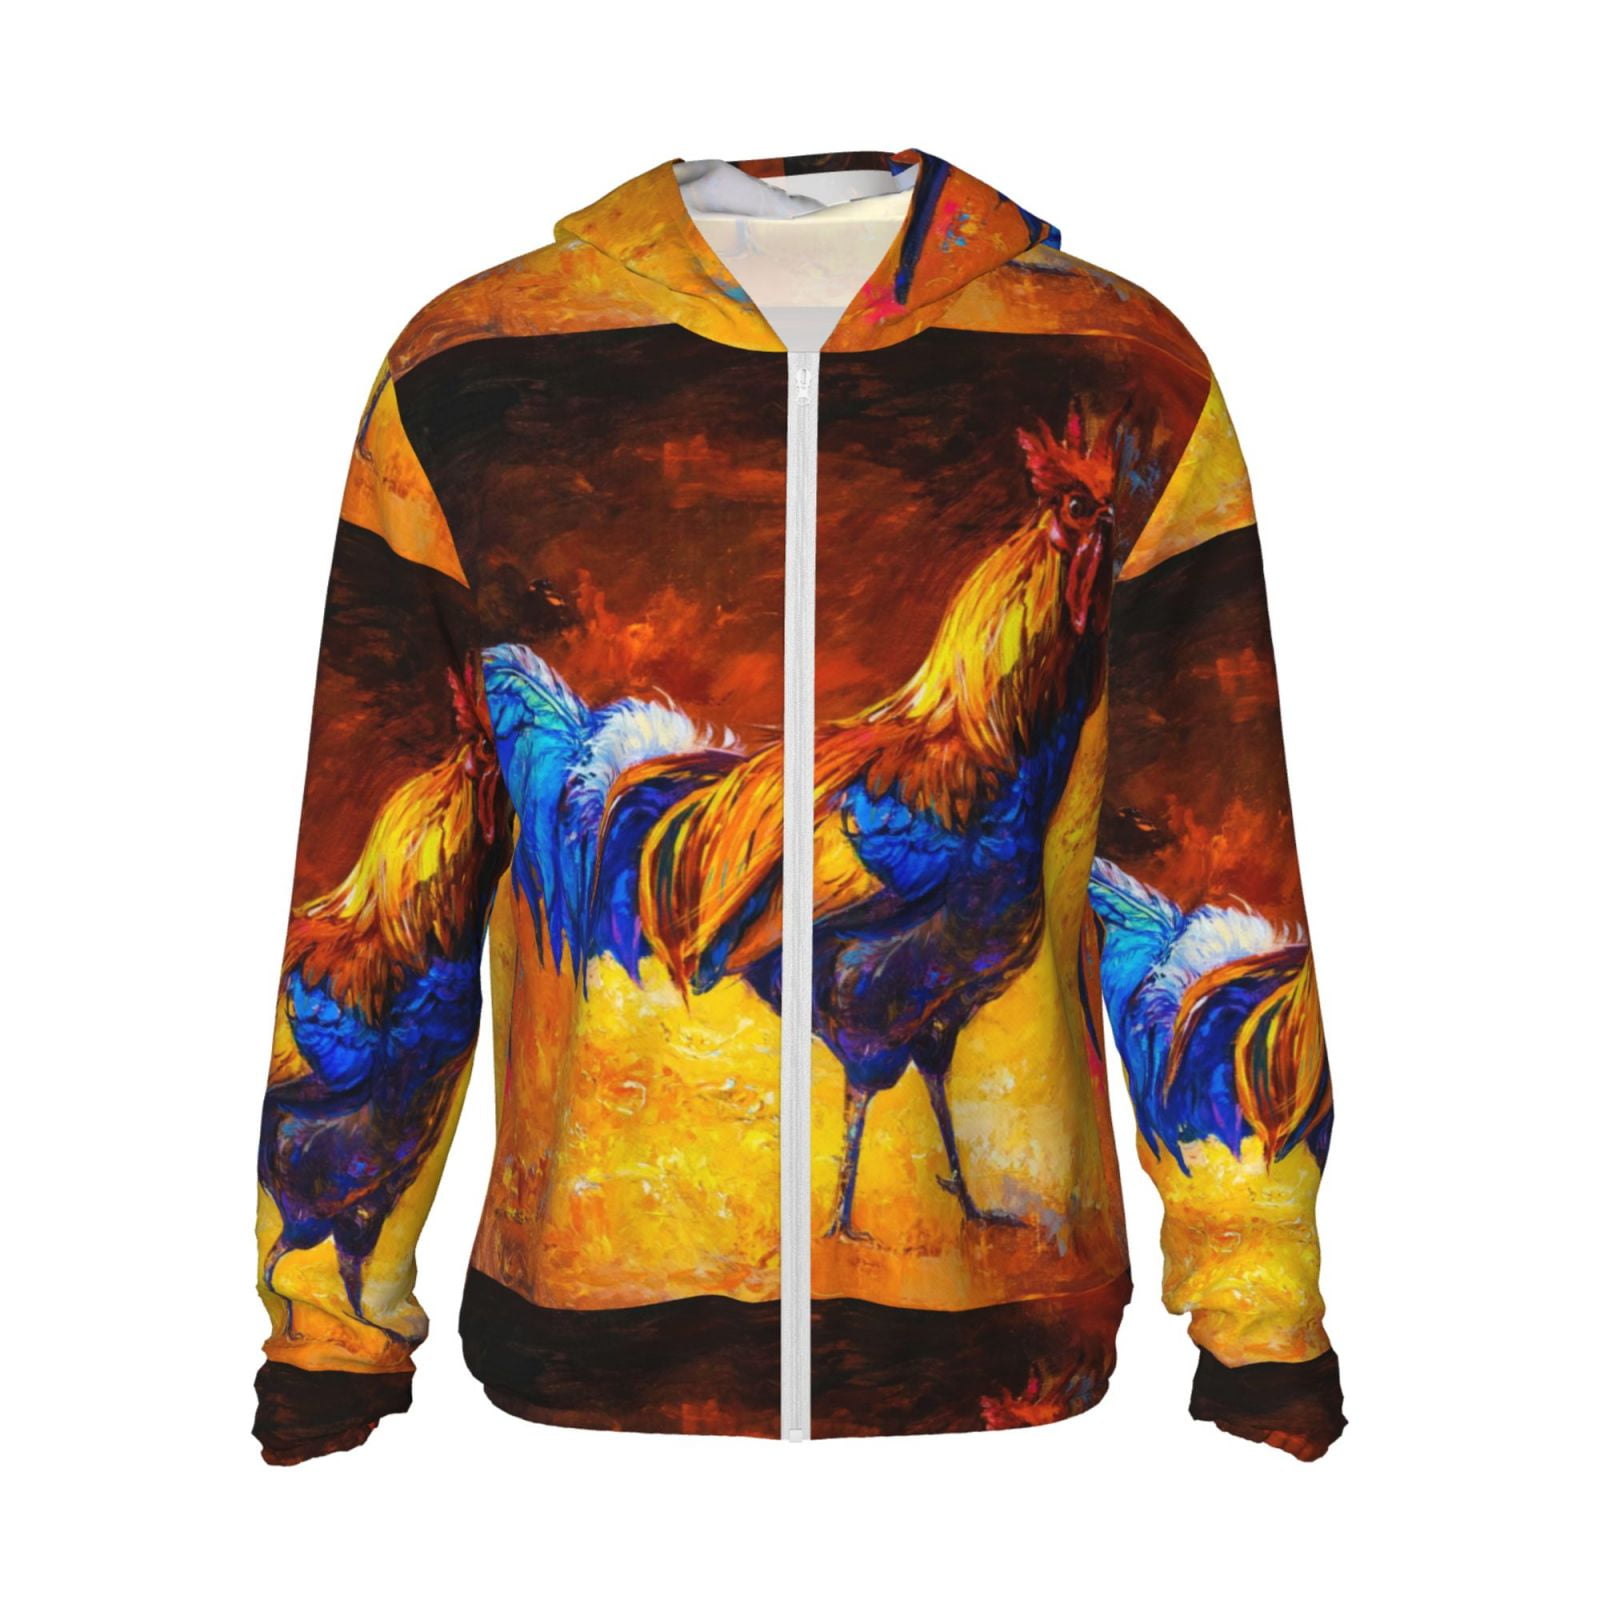 Gaeub Colorful Rooster Men's and Women's UPF 50+ Long-Sleeved Sun ...